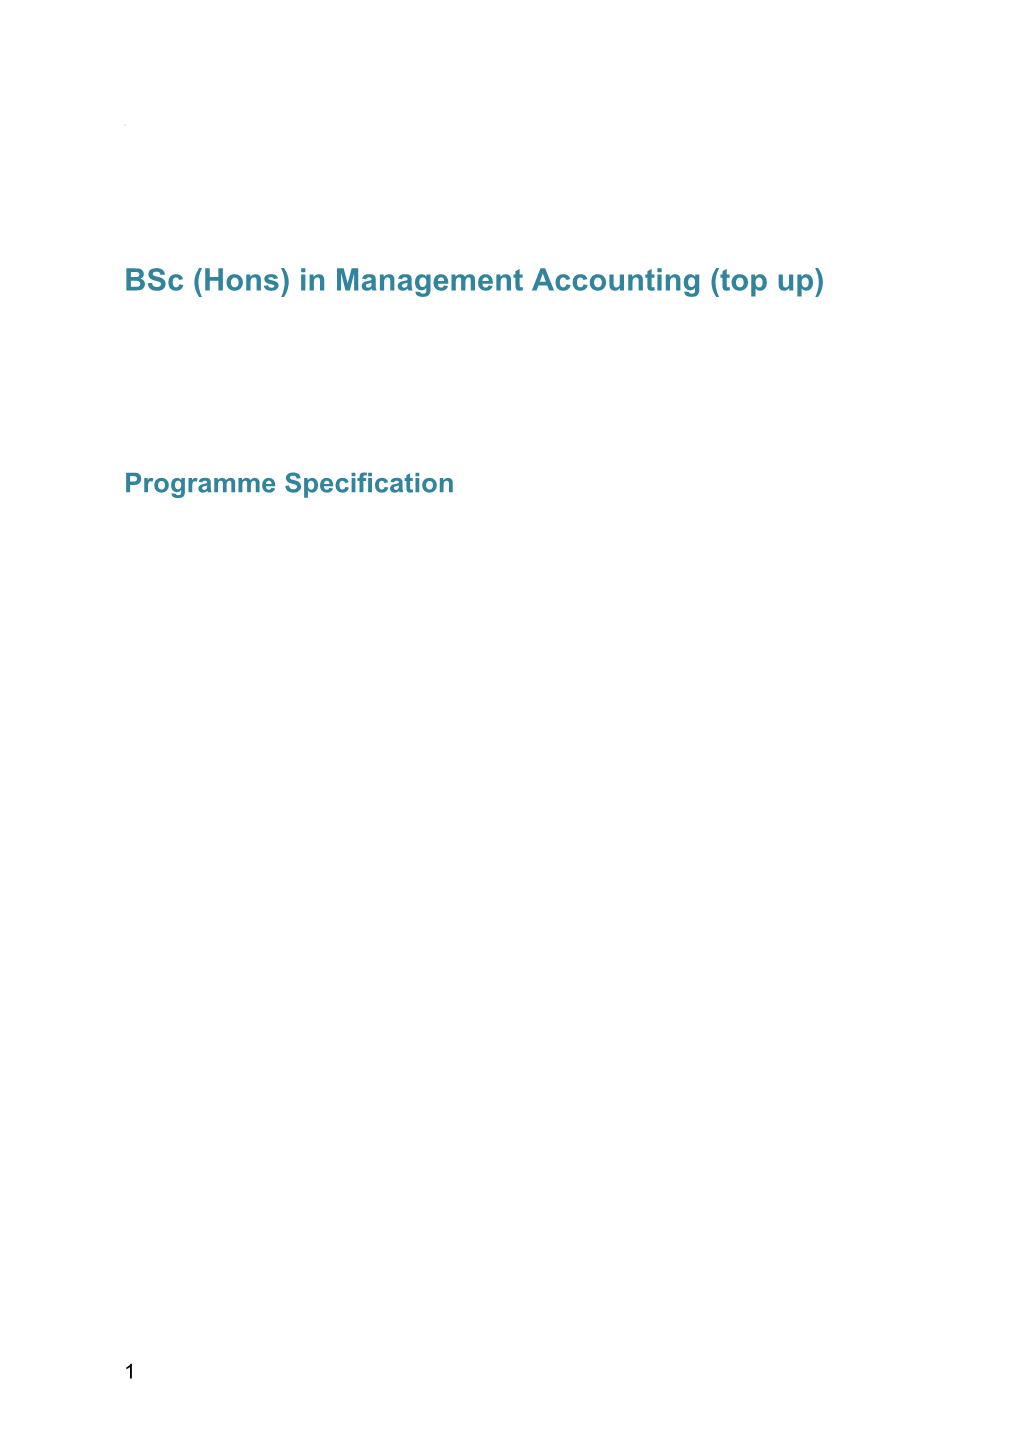 Bsc (Hons) in Management Accounting (Top Up)